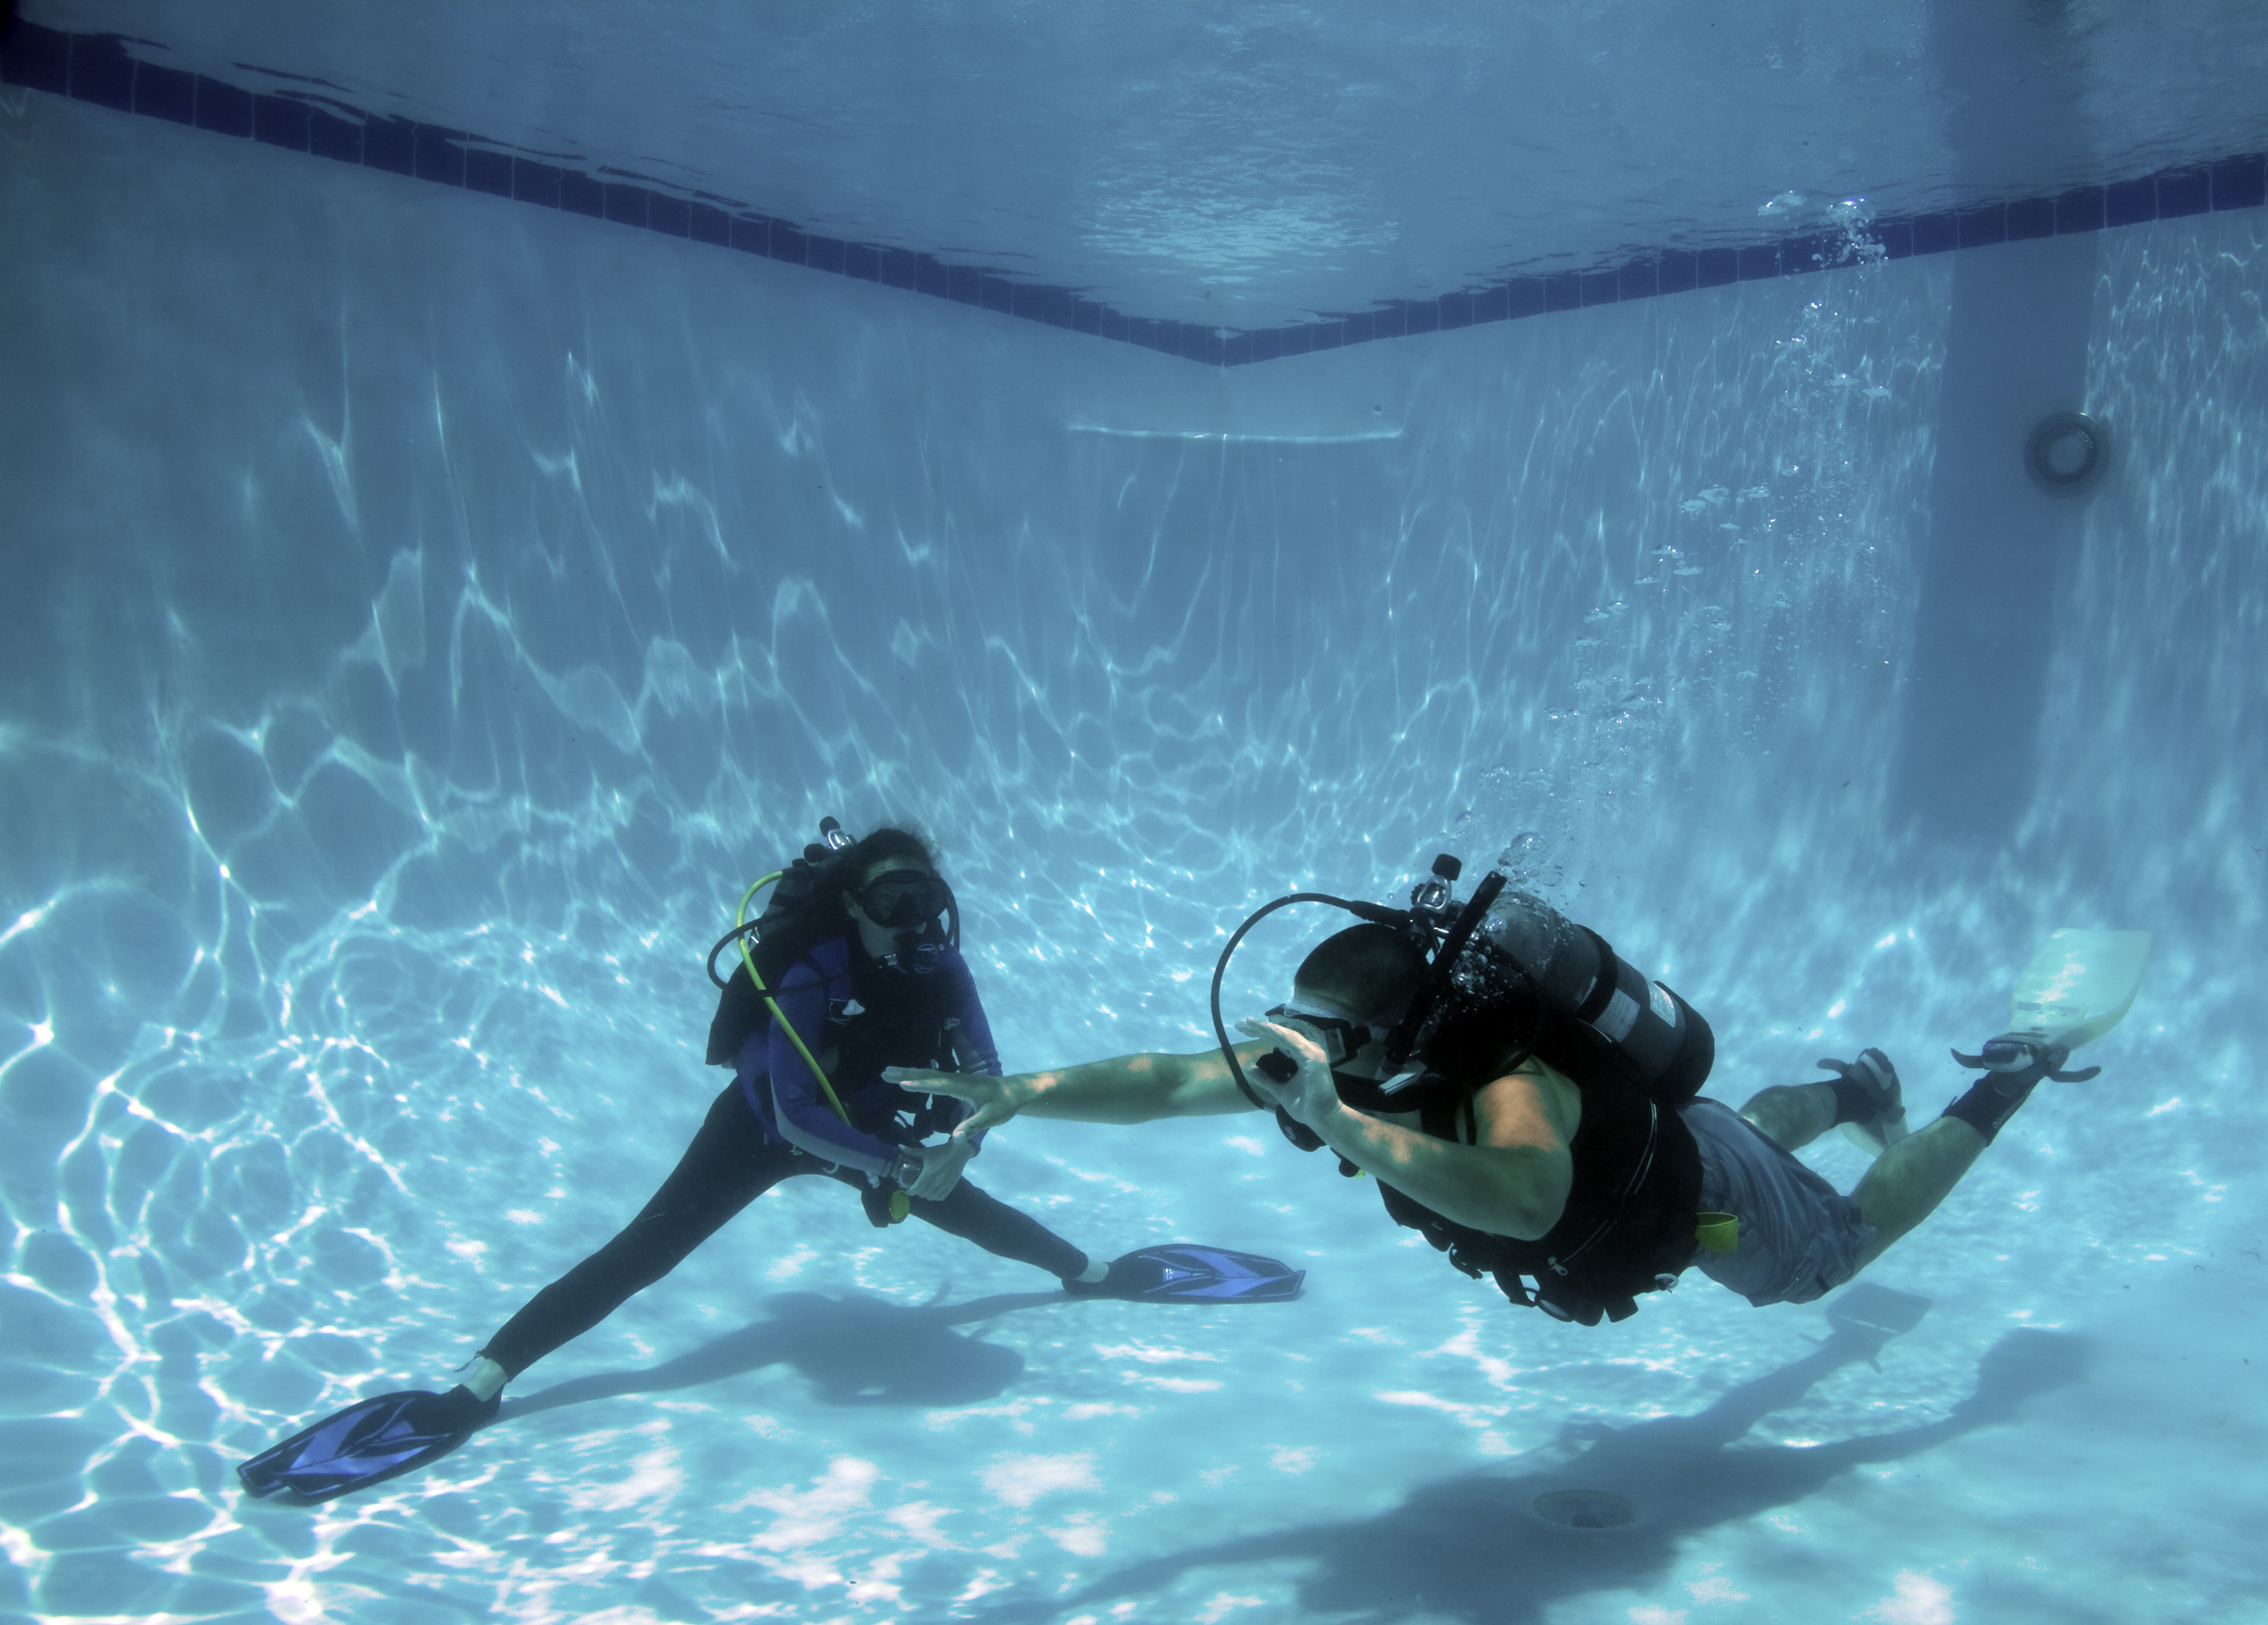 Dive instructor begins open water training exercises with a new group of dive trainees